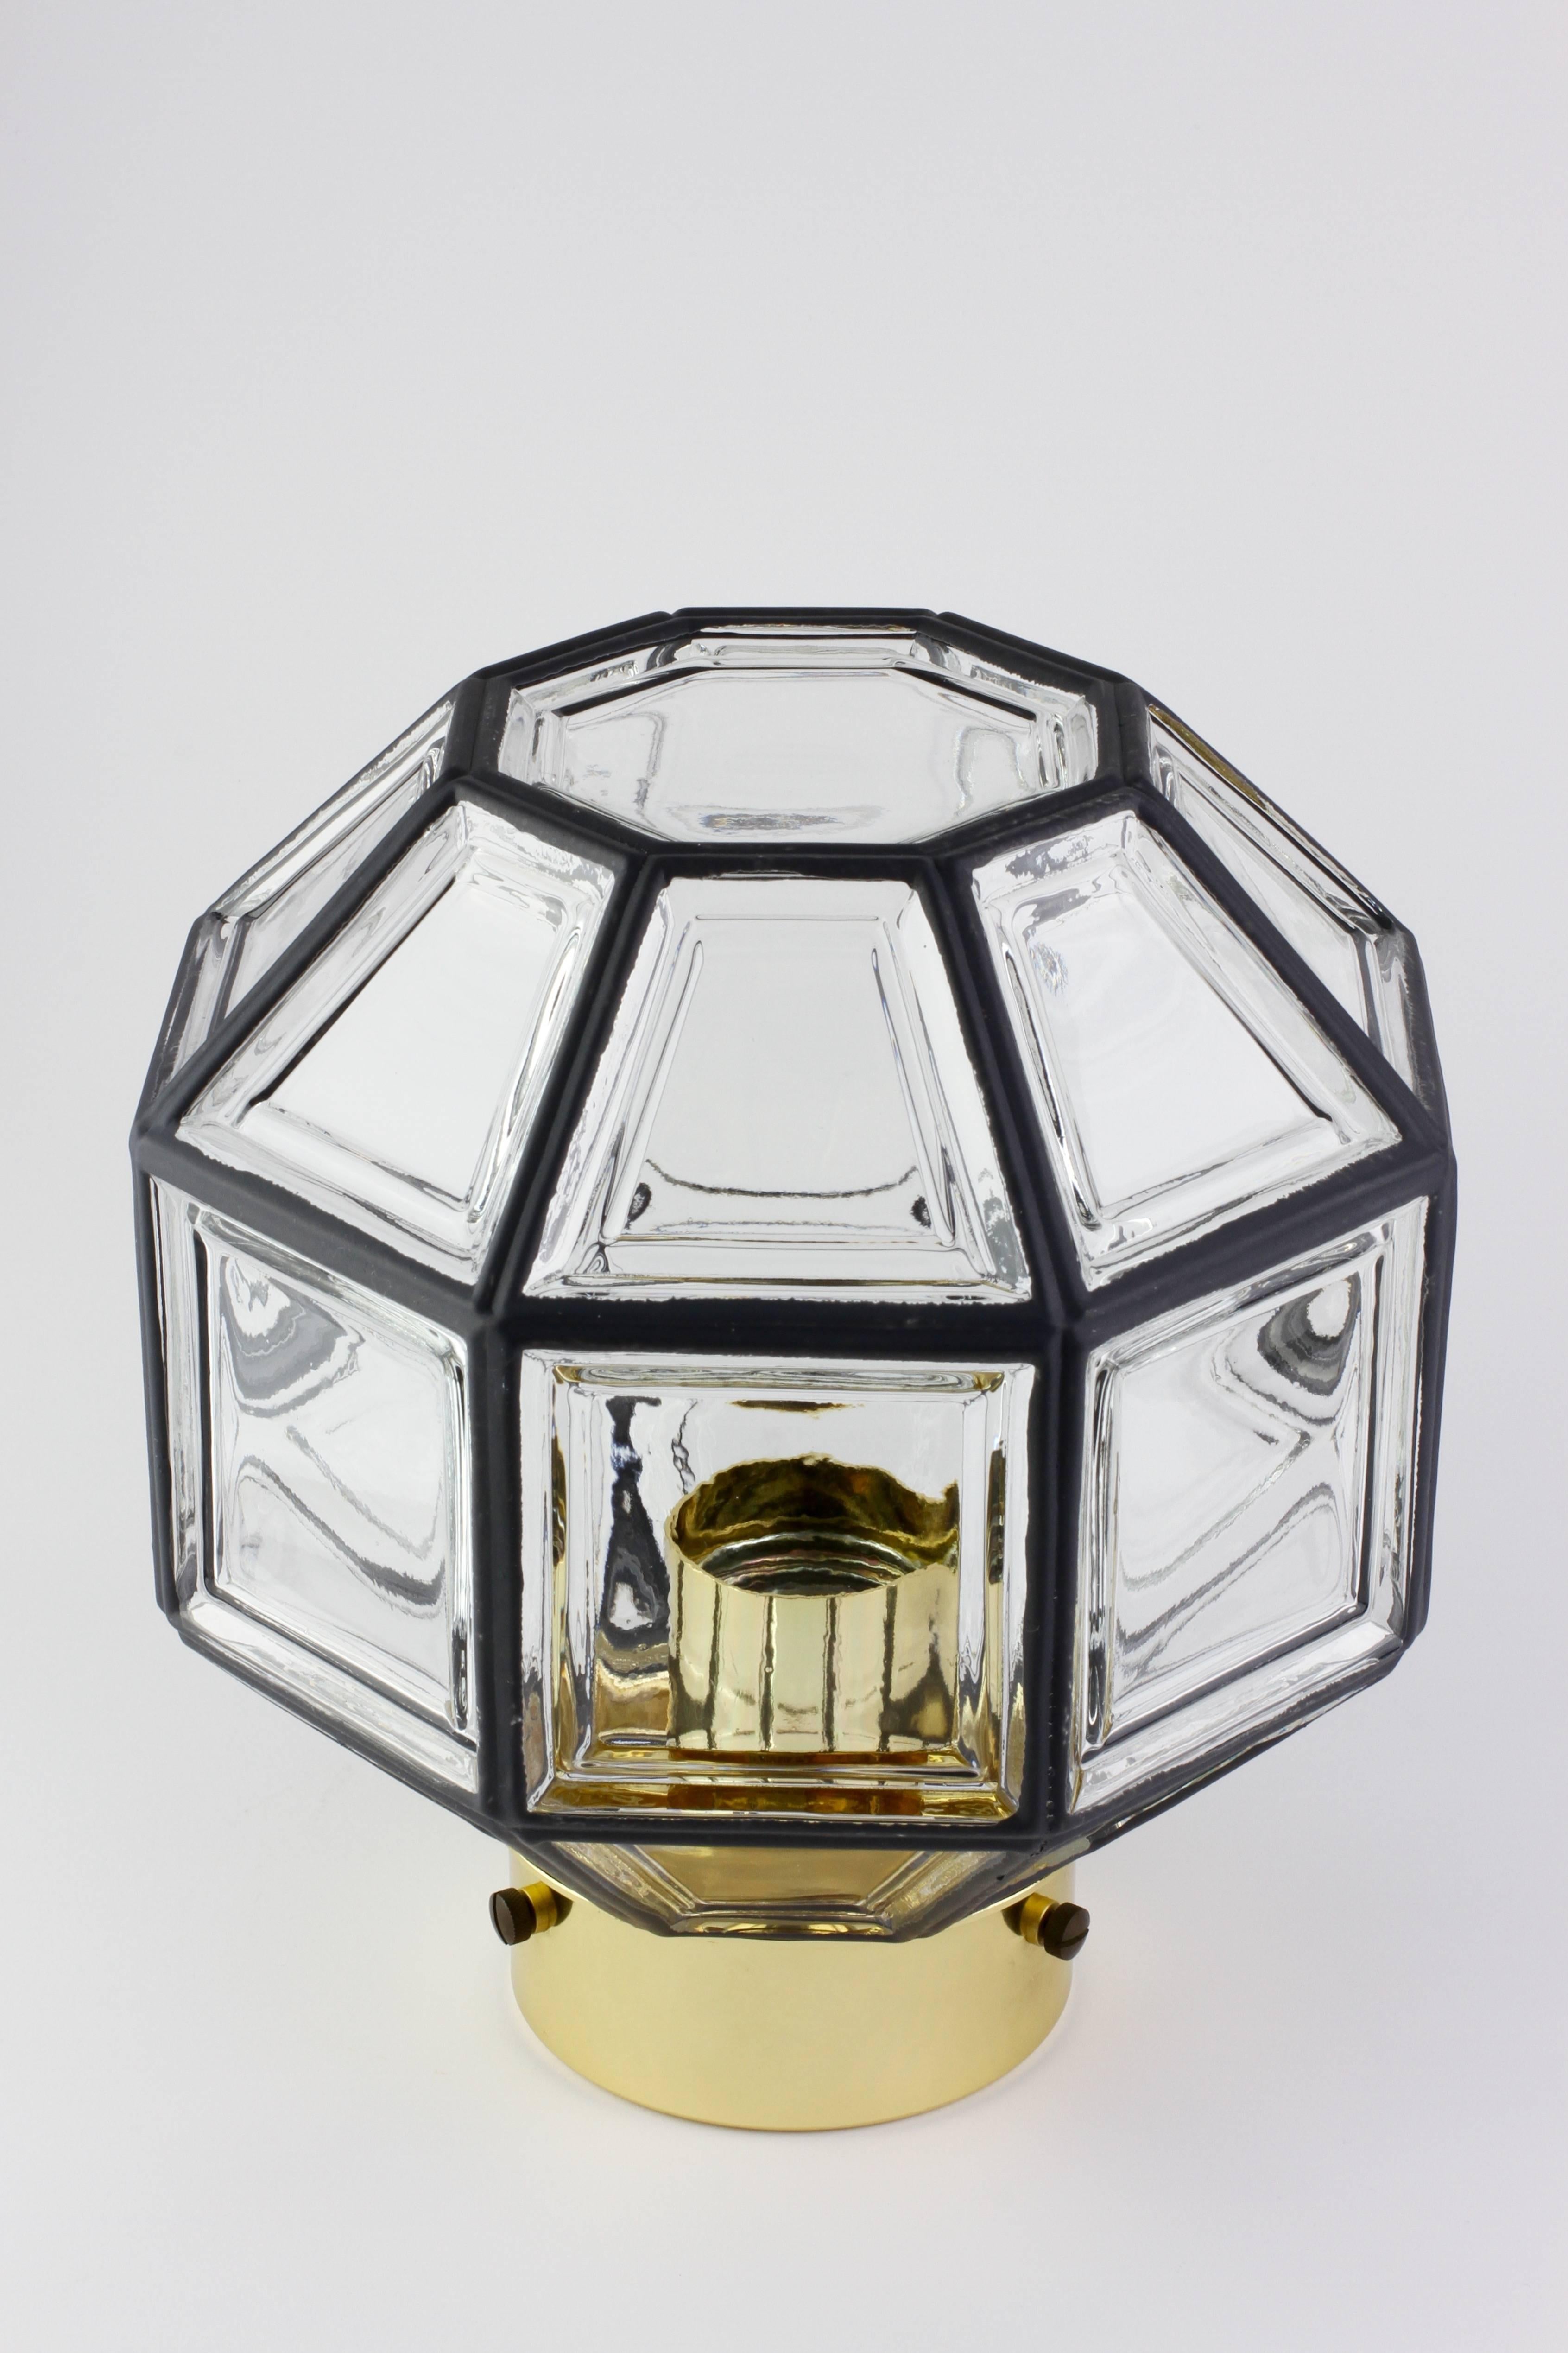 One of a set of ten octagonally shaped, mid-century minimalist German made flush mount light fixtures produced by Glashütte, Limburg, circa 1965. These Contemporary Art Deco and lantern style Plafonniers cast a fantastic light when mounted on the